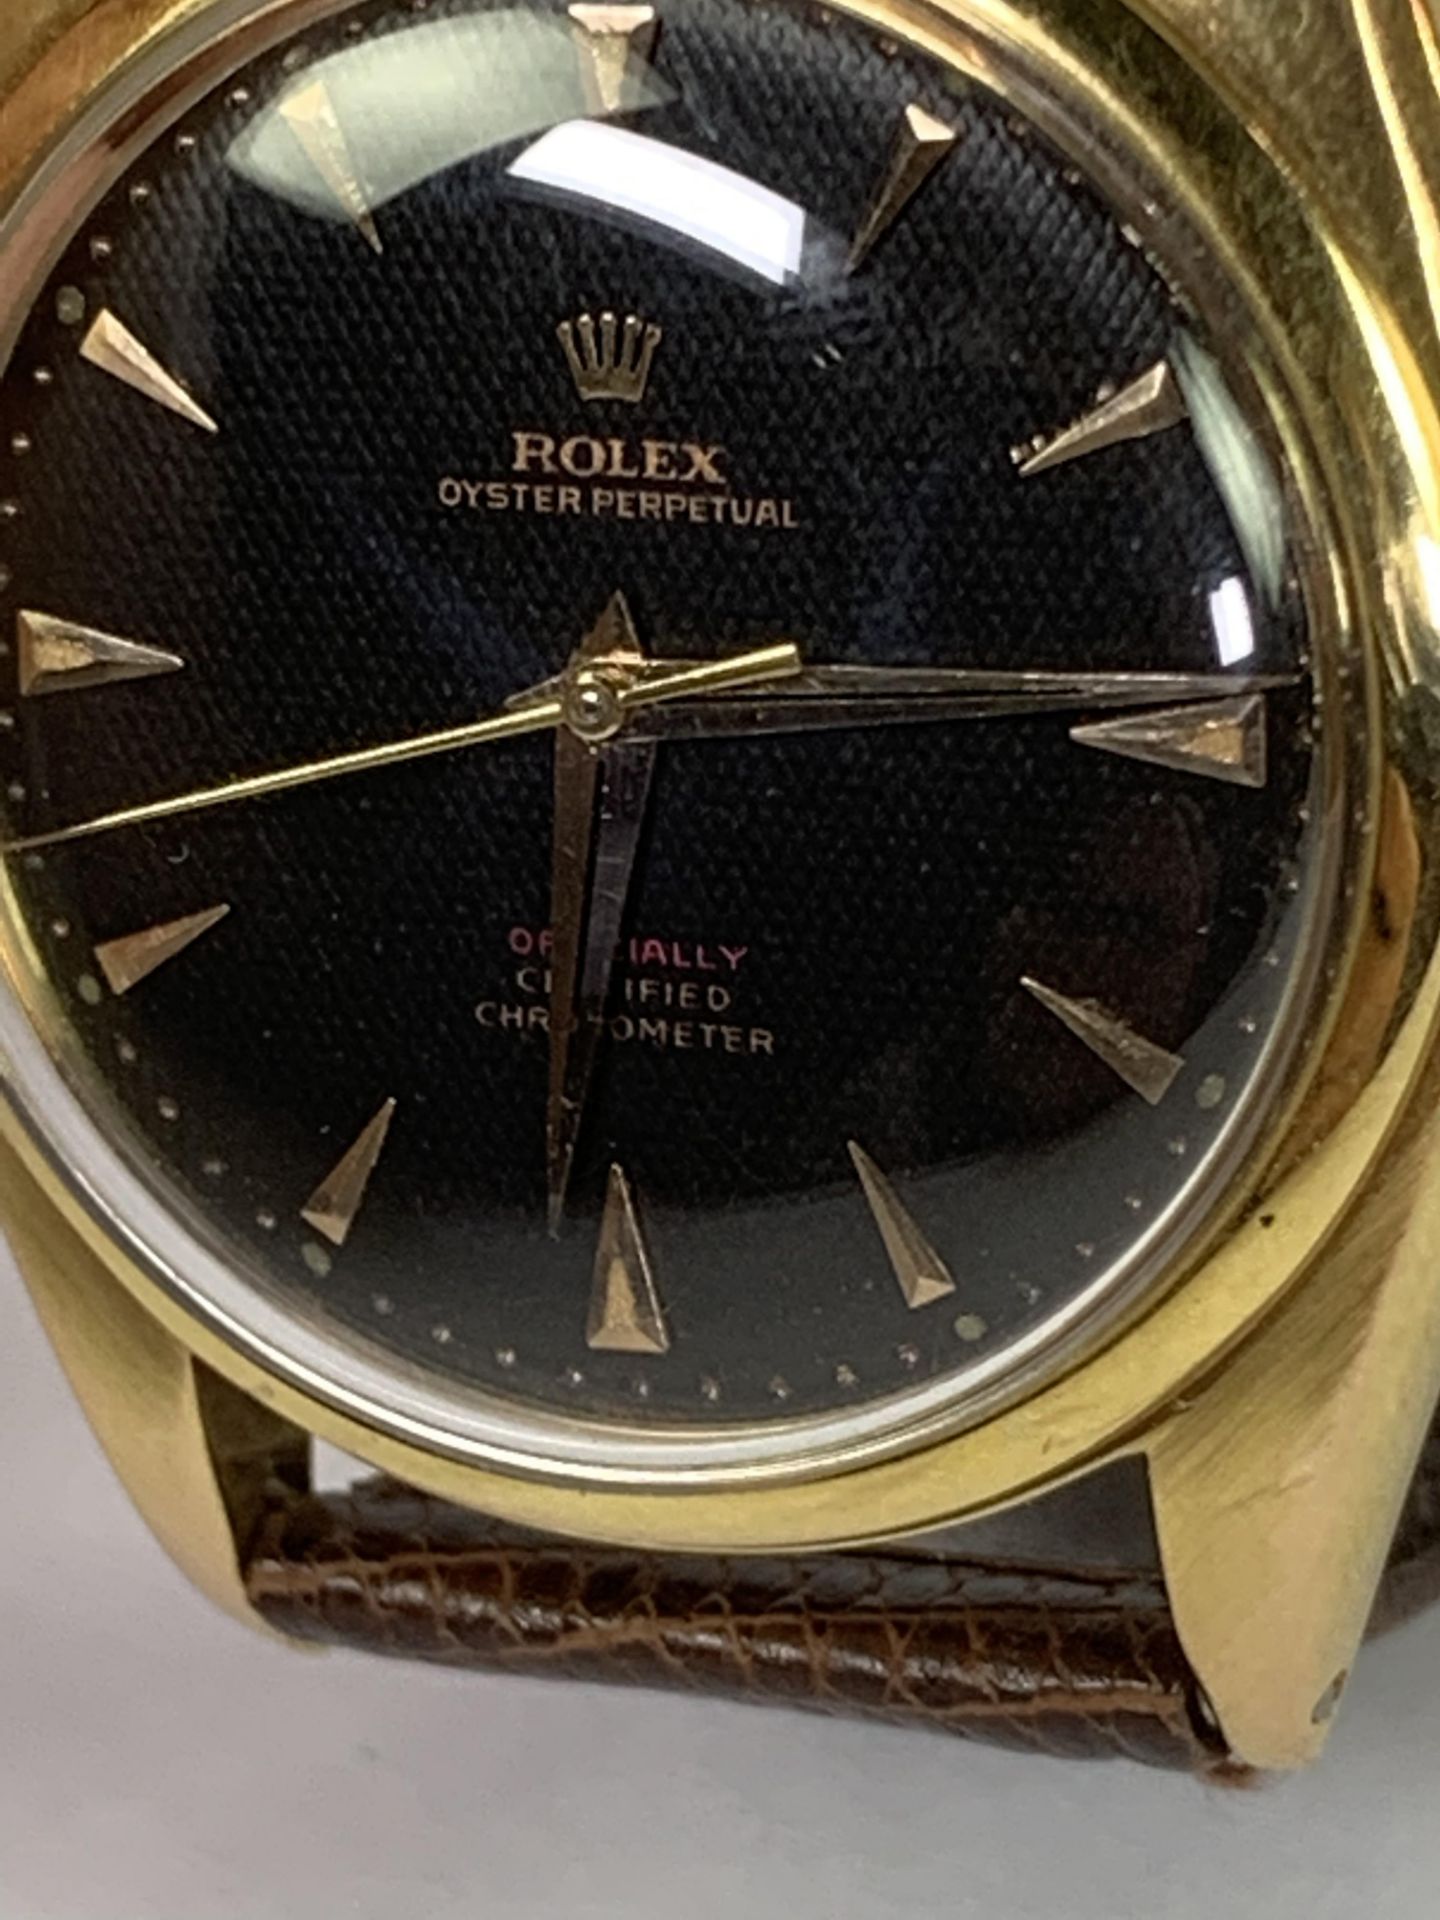 Extremely rare 1950's men's Rolex Oyster Perpetual ref 6029, crown 1951 - Image 11 of 16